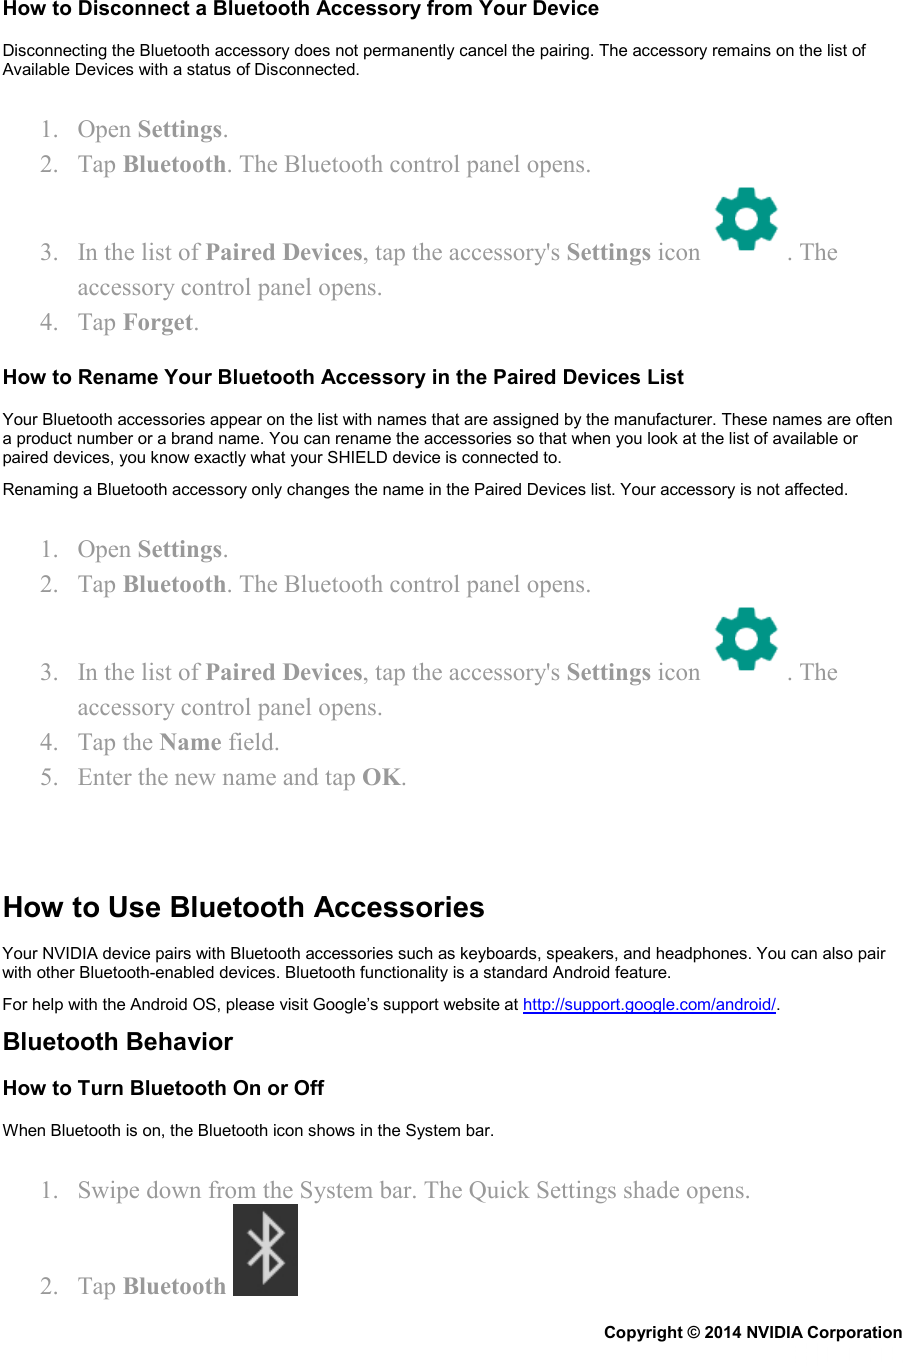 How to Disconnect a Bluetooth Accessory from Your Device Disconnecting the Bluetooth accessory does not permanently cancel the pairing. The accessory remains on the list of Available Devices with a status of Disconnected. 1. Open Settings. 2. Tap Bluetooth. The Bluetooth control panel opens. 3. In the list of Paired Devices, tap the accessory&apos;s Settings icon  . The accessory control panel opens. 4. Tap Forget. How to Rename Your Bluetooth Accessory in the Paired Devices List Your Bluetooth accessories appear on the list with names that are assigned by the manufacturer. These names are often a product number or a brand name. You can rename the accessories so that when you look at the list of available or paired devices, you know exactly what your SHIELD device is connected to. Renaming a Bluetooth accessory only changes the name in the Paired Devices list. Your accessory is not affected. 1. Open Settings. 2. Tap Bluetooth. The Bluetooth control panel opens. 3. In the list of Paired Devices, tap the accessory&apos;s Settings icon  . The accessory control panel opens. 4. Tap the Name field. 5. Enter the new name and tap OK.    How to Use Bluetooth Accessories Your NVIDIA device pairs with Bluetooth accessories such as keyboards, speakers, and headphones. You can also pair with other Bluetooth-enabled devices. Bluetooth functionality is a standard Android feature.  For help with the Android OS, please visit Google’s support website at http://support.google.com/android/. Bluetooth Behavior How to Turn Bluetooth On or Off When Bluetooth is on, the Bluetooth icon shows in the System bar. 1. Swipe down from the System bar. The Quick Settings shade opens. 2. Tap Bluetooth   Copyright © 2014 NVIDIA Corporation   